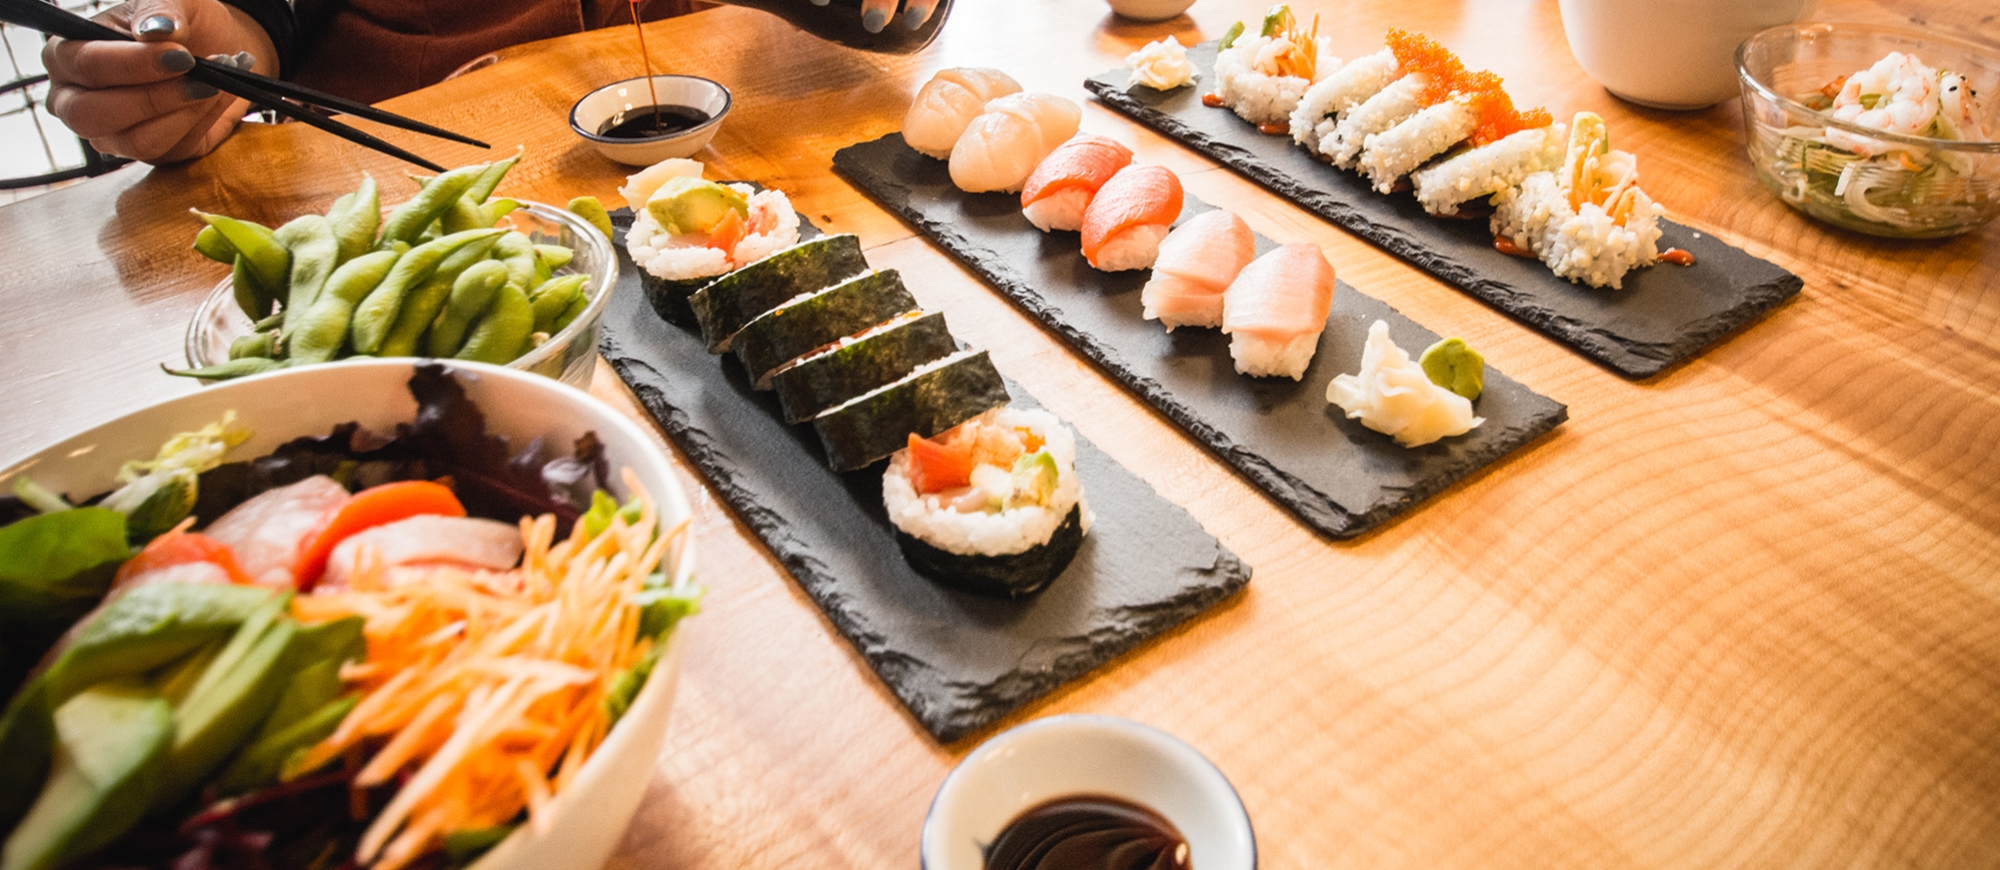 Hands pouirng soy sauce into a small dish with a table full of colourful sushi.